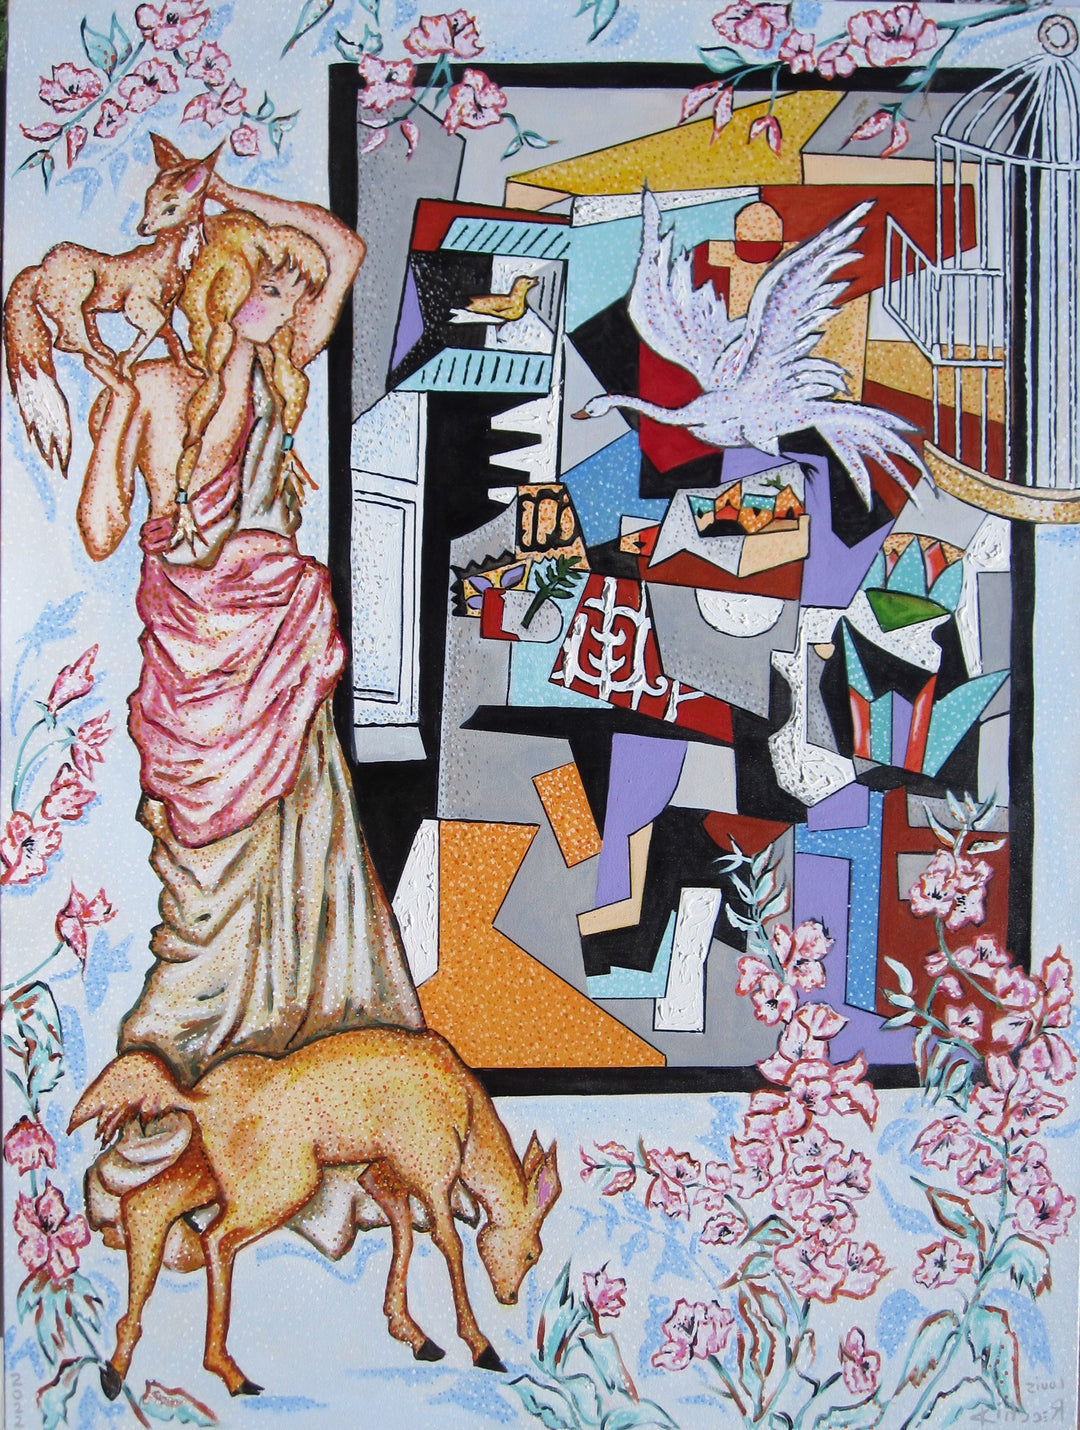 A mesmerizing oil on canvas artwork featuring the captivating connection between a woman and a deer. Inspired by the "Interior with Picasso" aesthetics, this painting by Louis Recchia showcases his exceptional artistic talent.